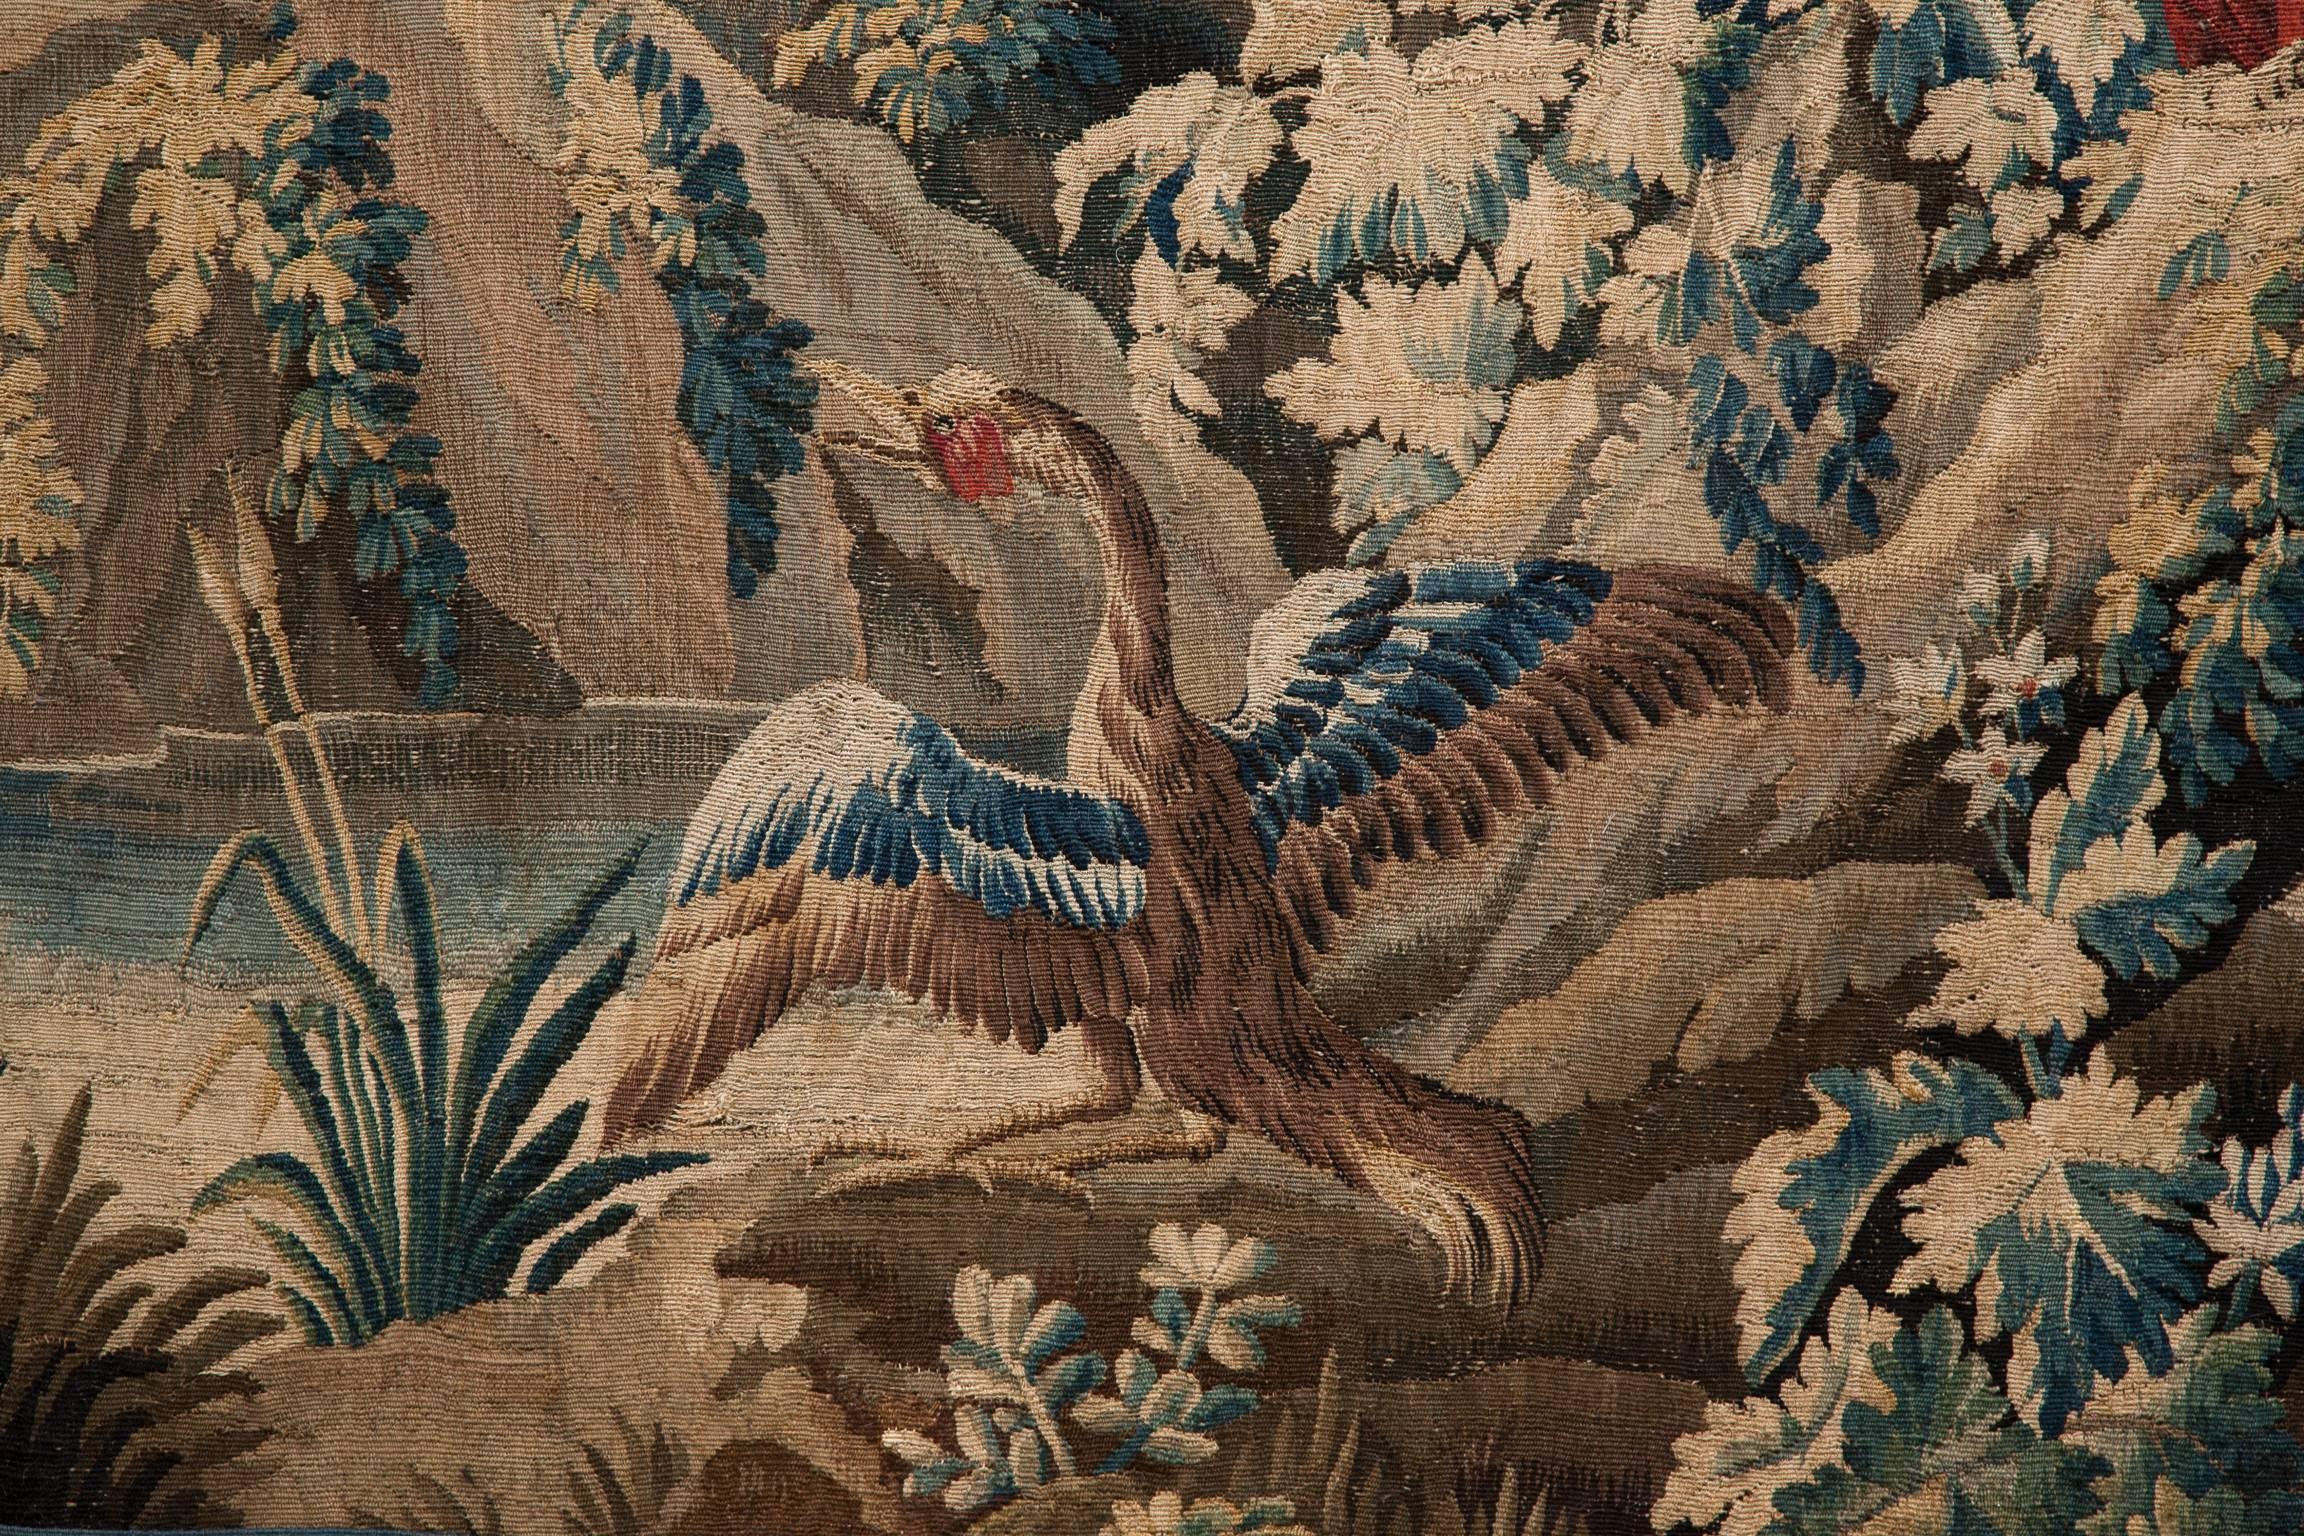 Woven with a three sided blue and red patterned border decorated with twisting acanthus leaves and flowers.
With an exotic bird in the foreground contemplating a pool of water, and a parrot perched on a rock nearby. In the distance a pagoda stands